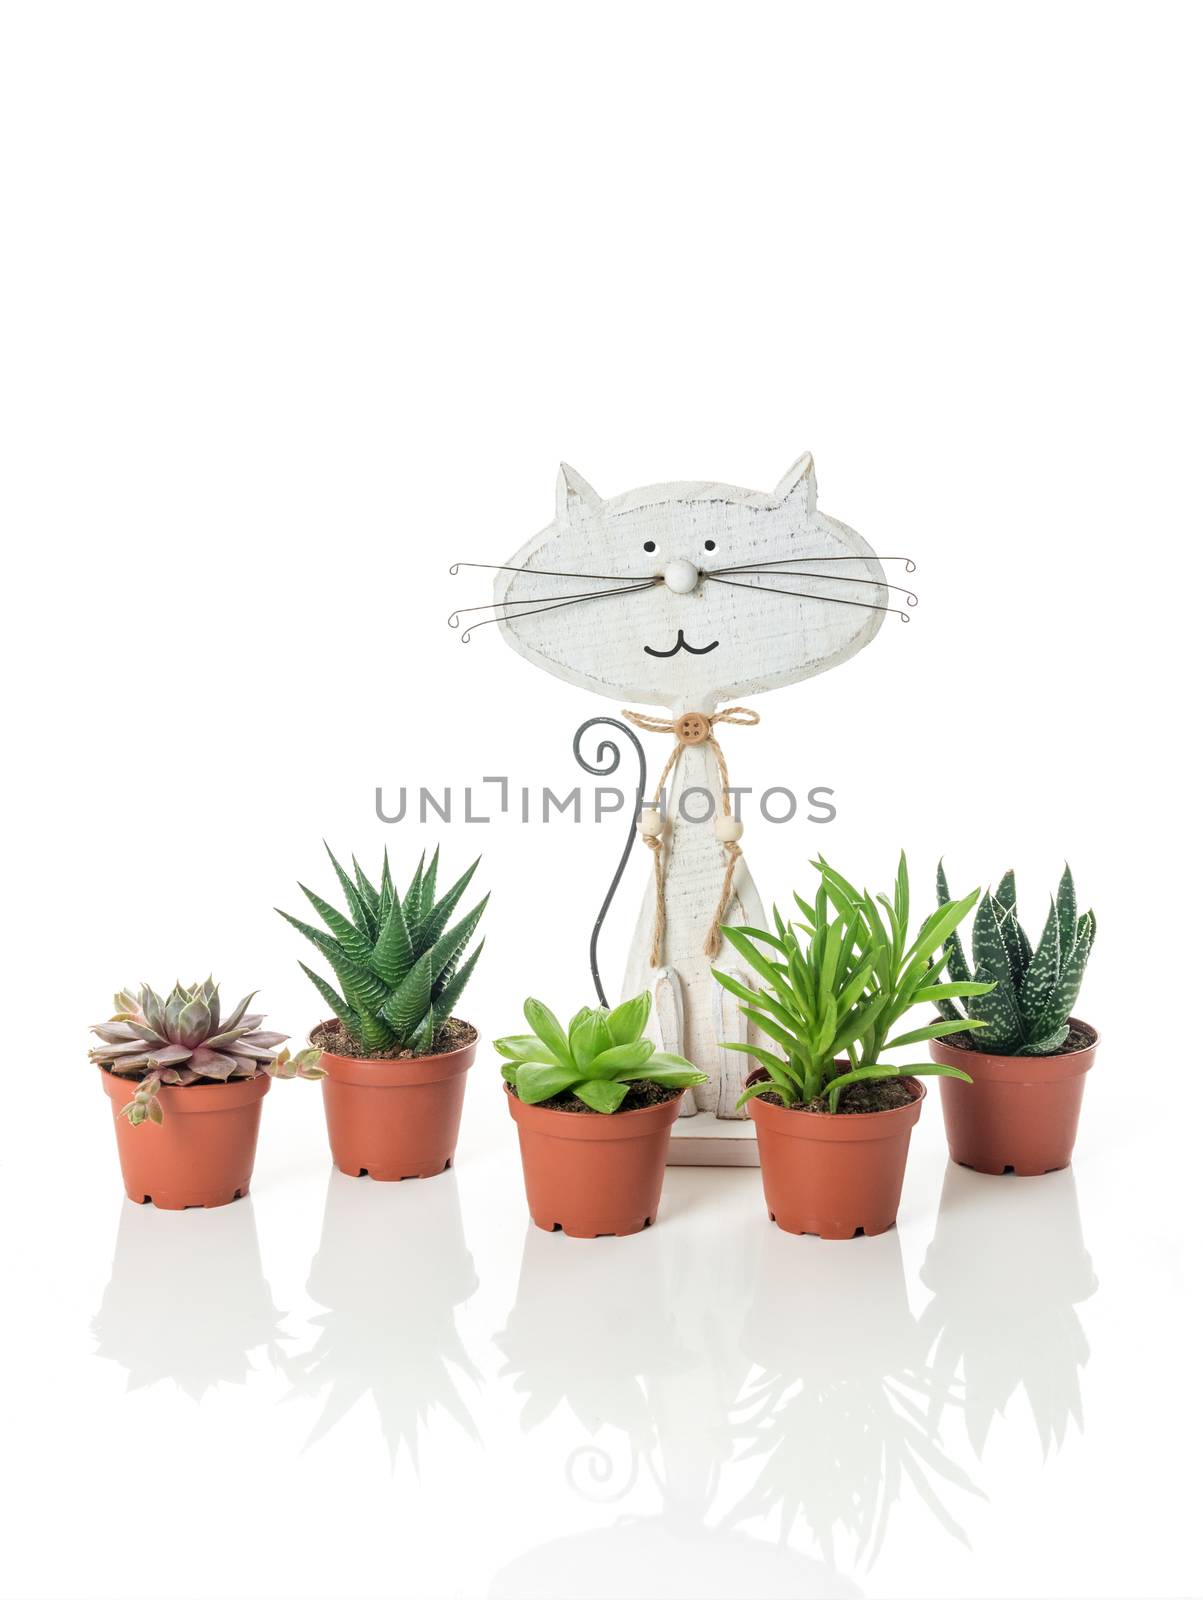 Potted succulent plants and wooden cat, on white background with reflection.